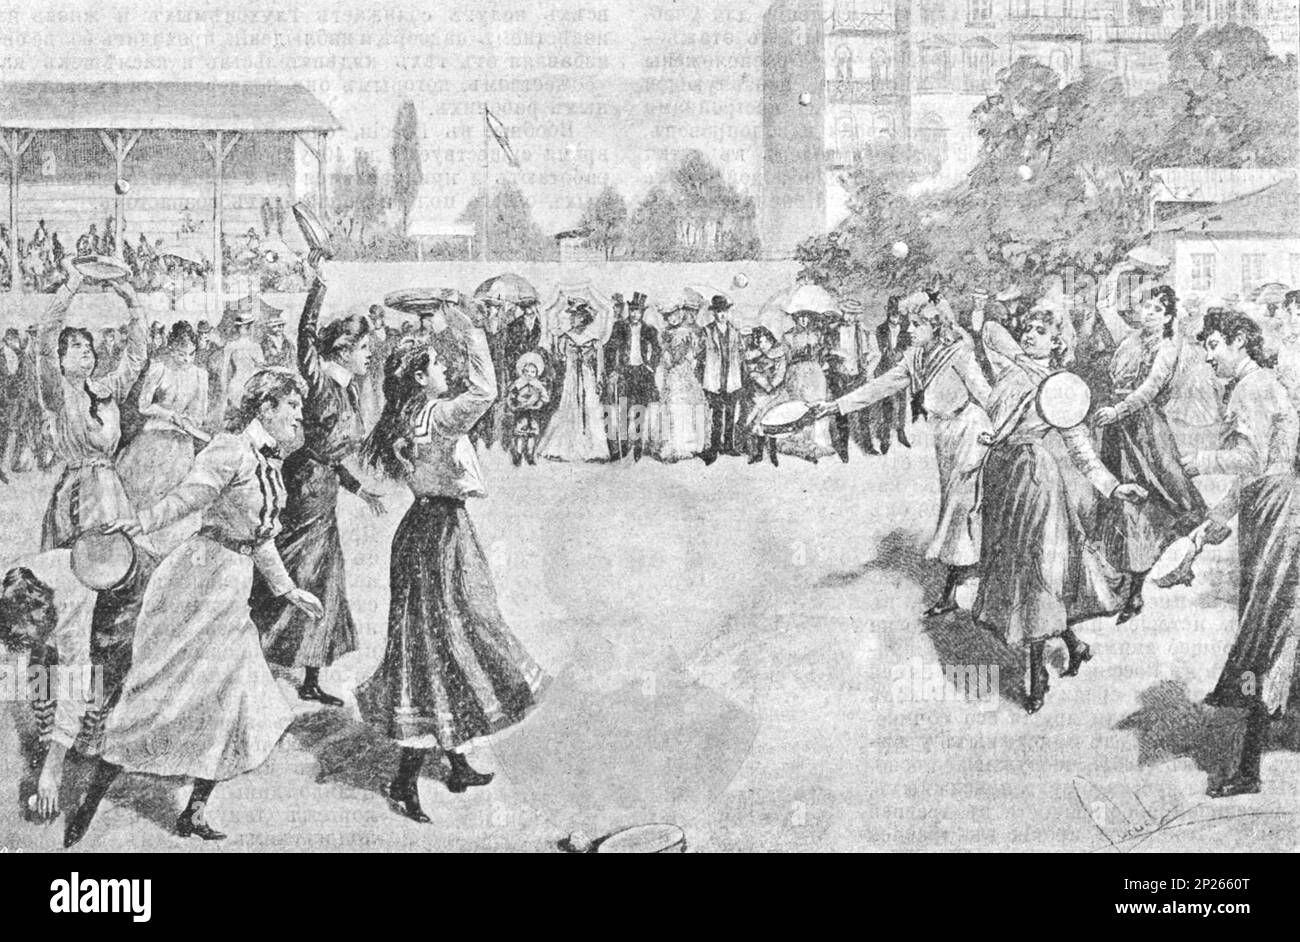 Tambourine game. Competition in the game in the Friedenau Park near Berlin. Early 20th century illustration. Stock Photo